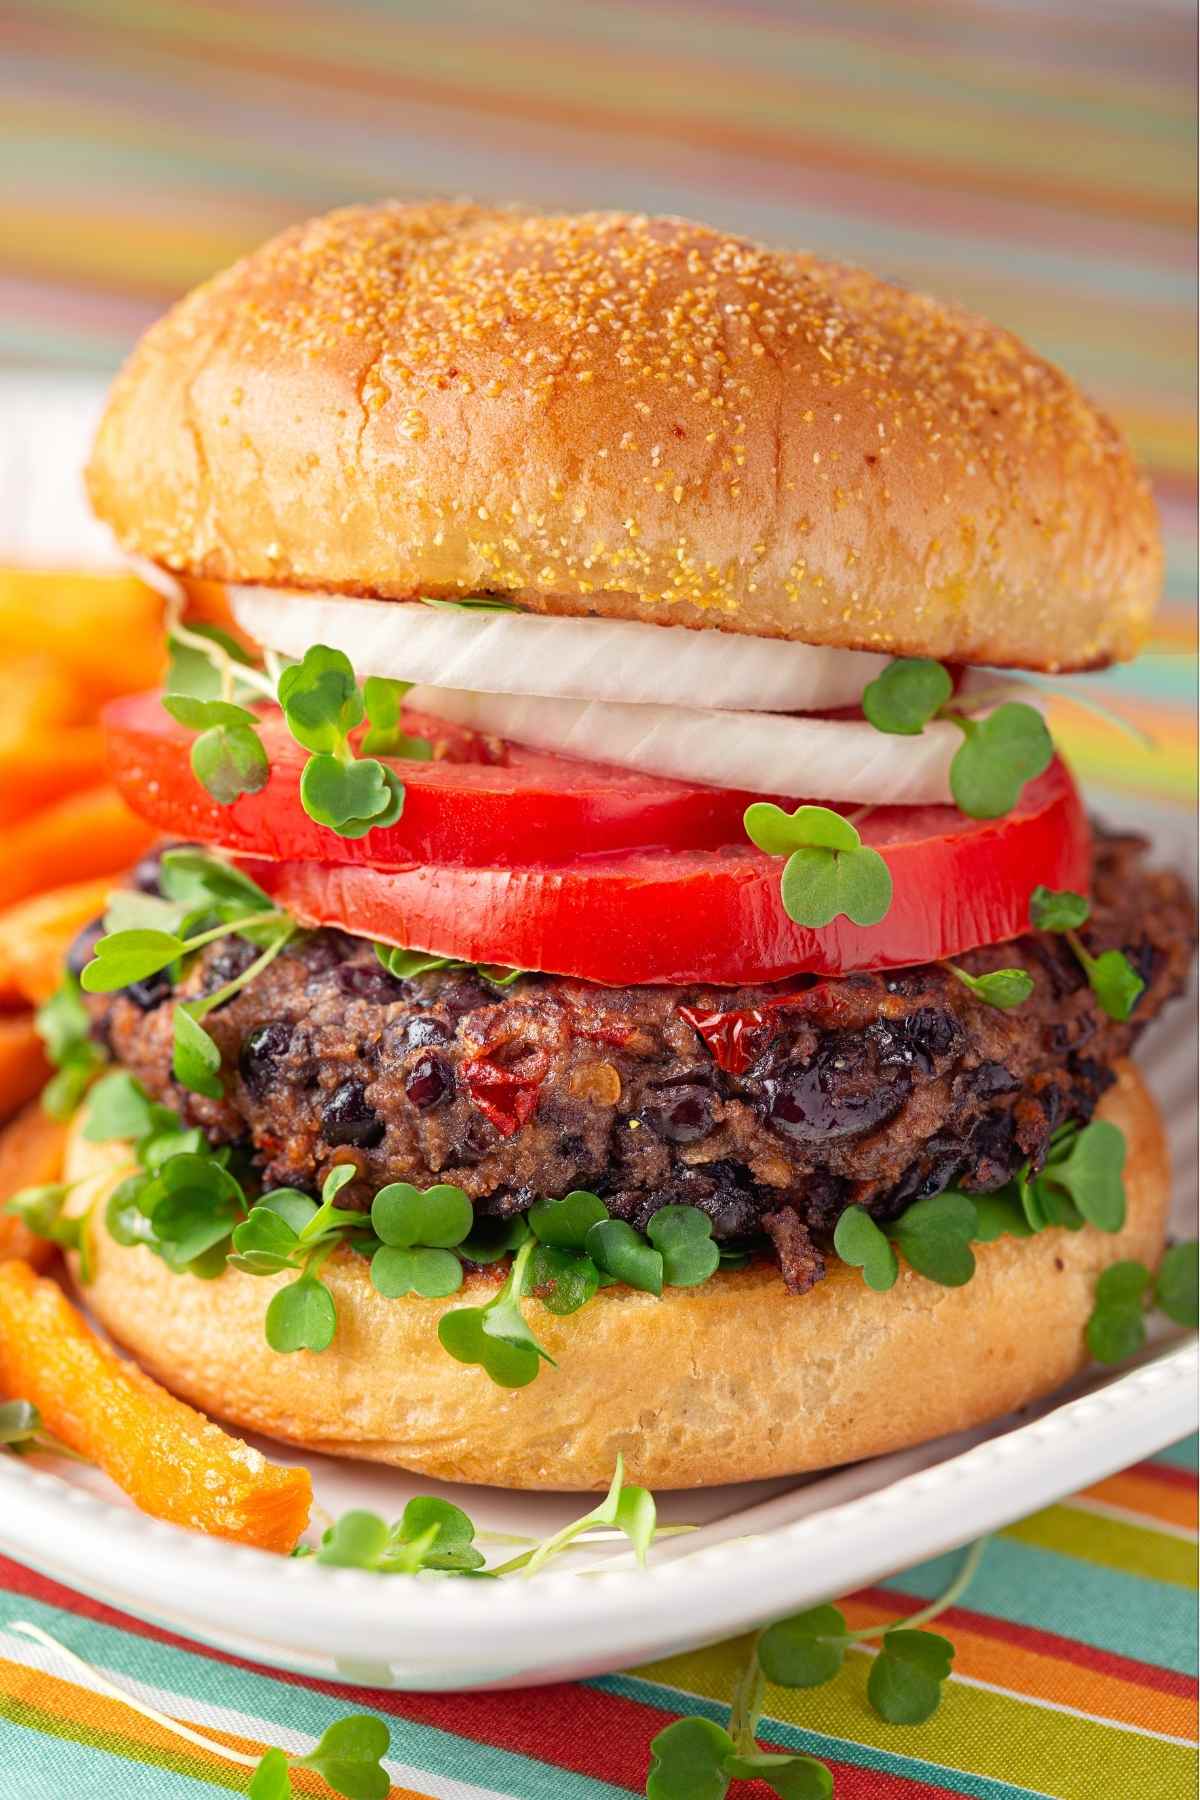 Healthy, hearty, and utterly satisfying, this Black Bean Patty is crispy on the outside and tender and flavor on the inside. Perfect for grilling and loaded with flavor, these black bean burgers are ideal for your plain or brioche buns.